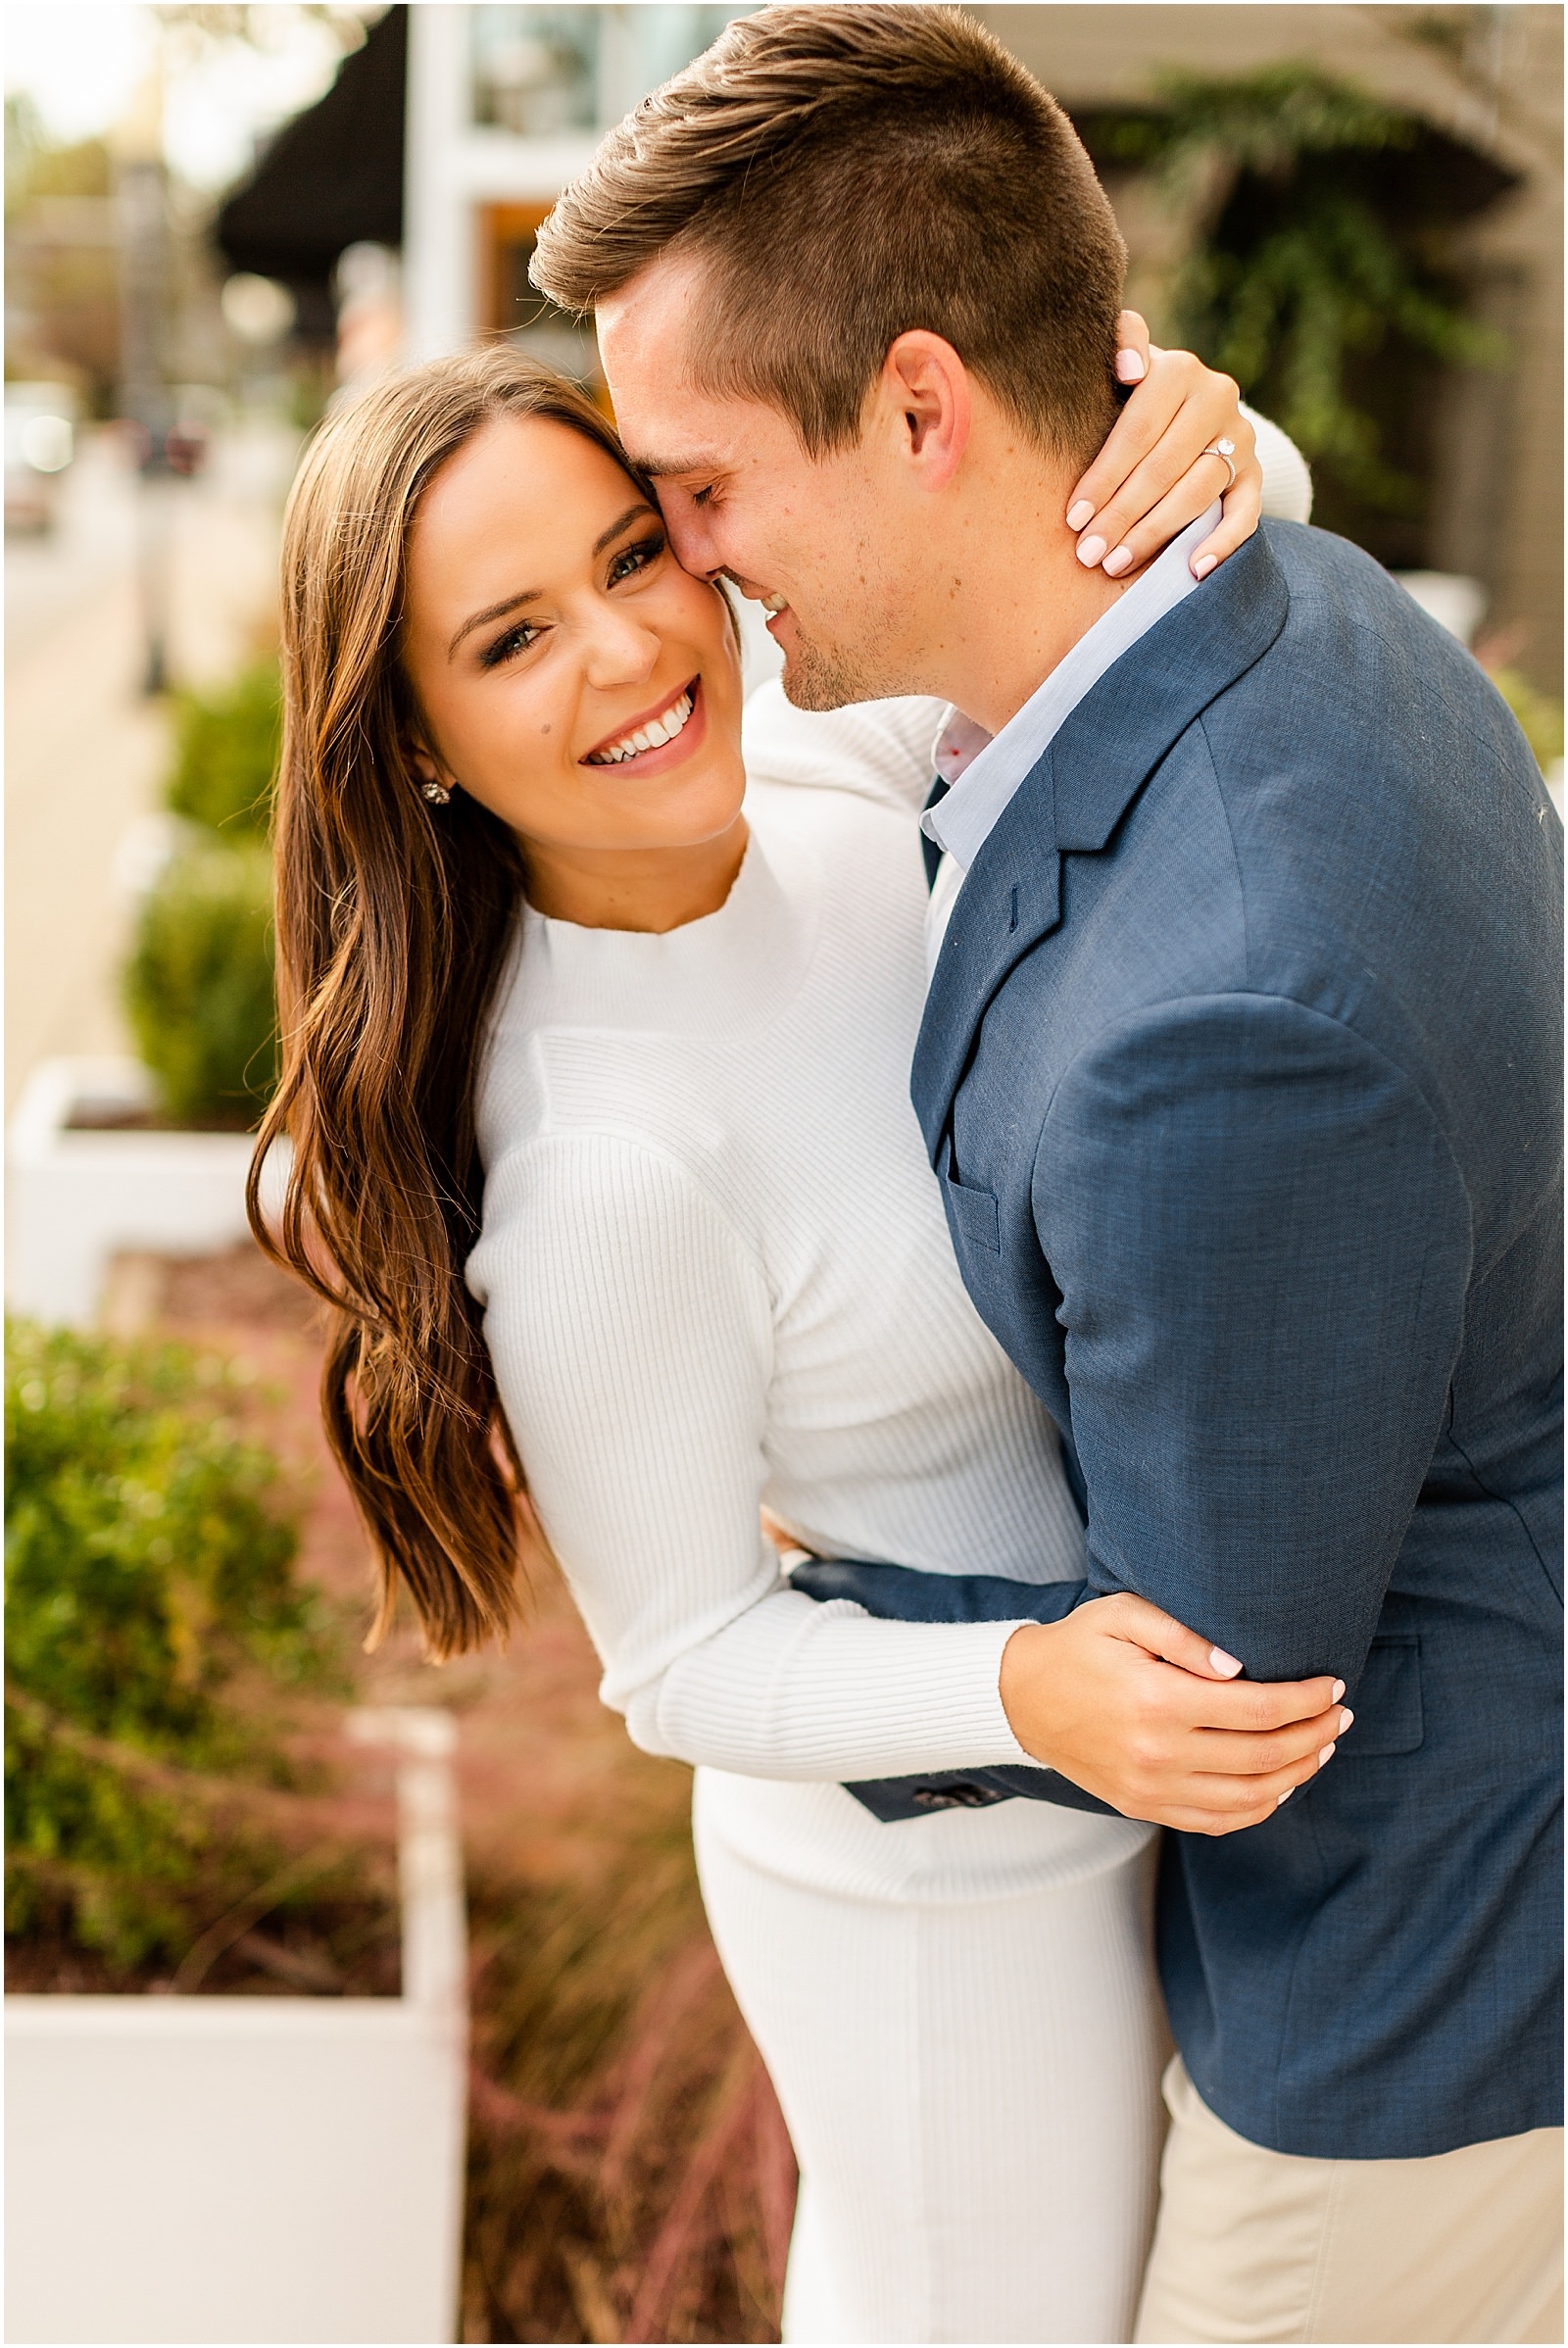 Emma and Jace's Downtown Newburgh Engagement Session | Bret and Brandie Photography | Evansville Indiana Wedding Photographers_0001.jpg